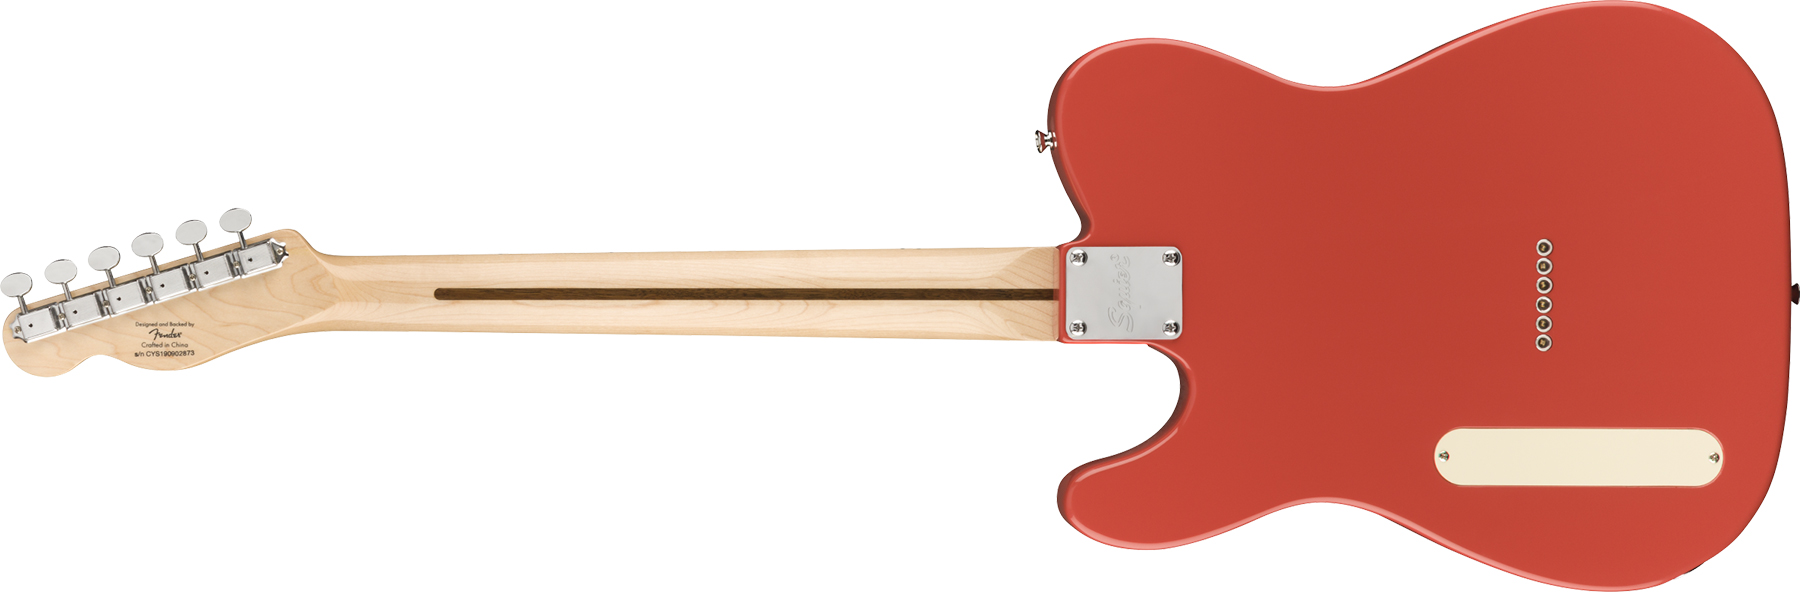 Squier Tele Thinline Cabronita Paranormal Ss Ht Mn - Fiesta Red - Guitare Électrique 1/2 Caisse - Variation 1